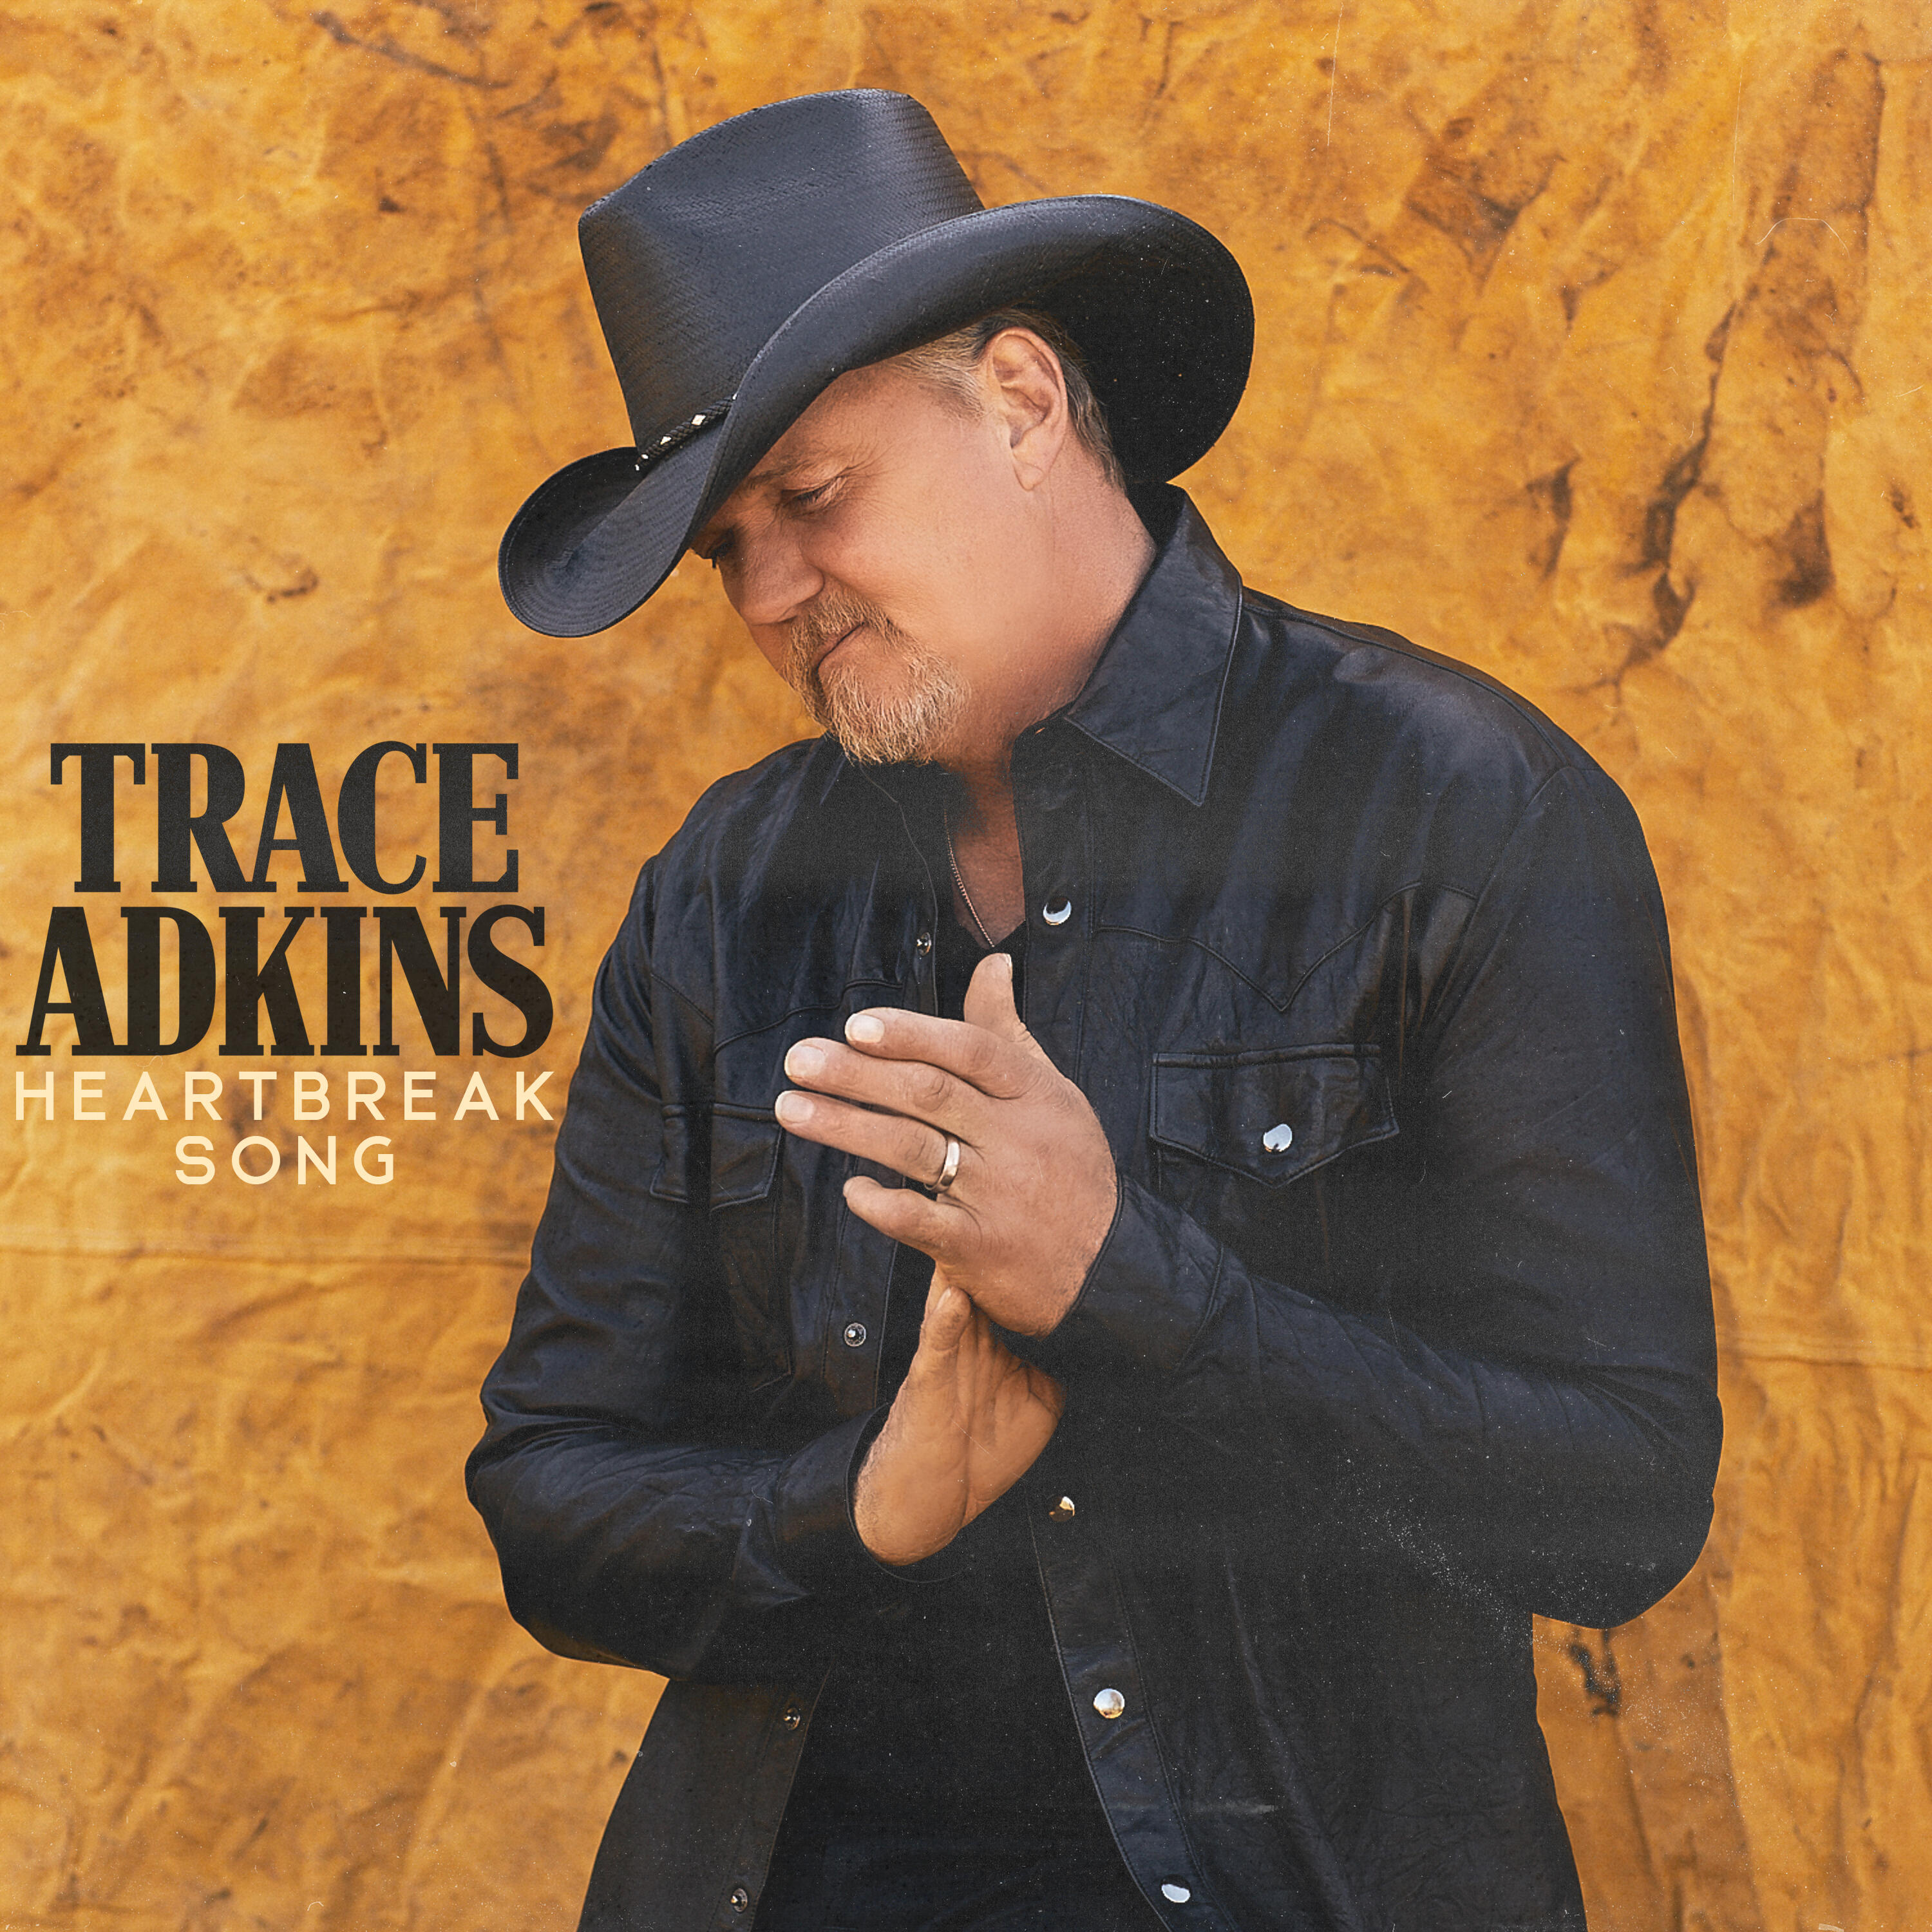 Stream Free Songs by Trace Adkins & Similar Artists | iHeartRadio